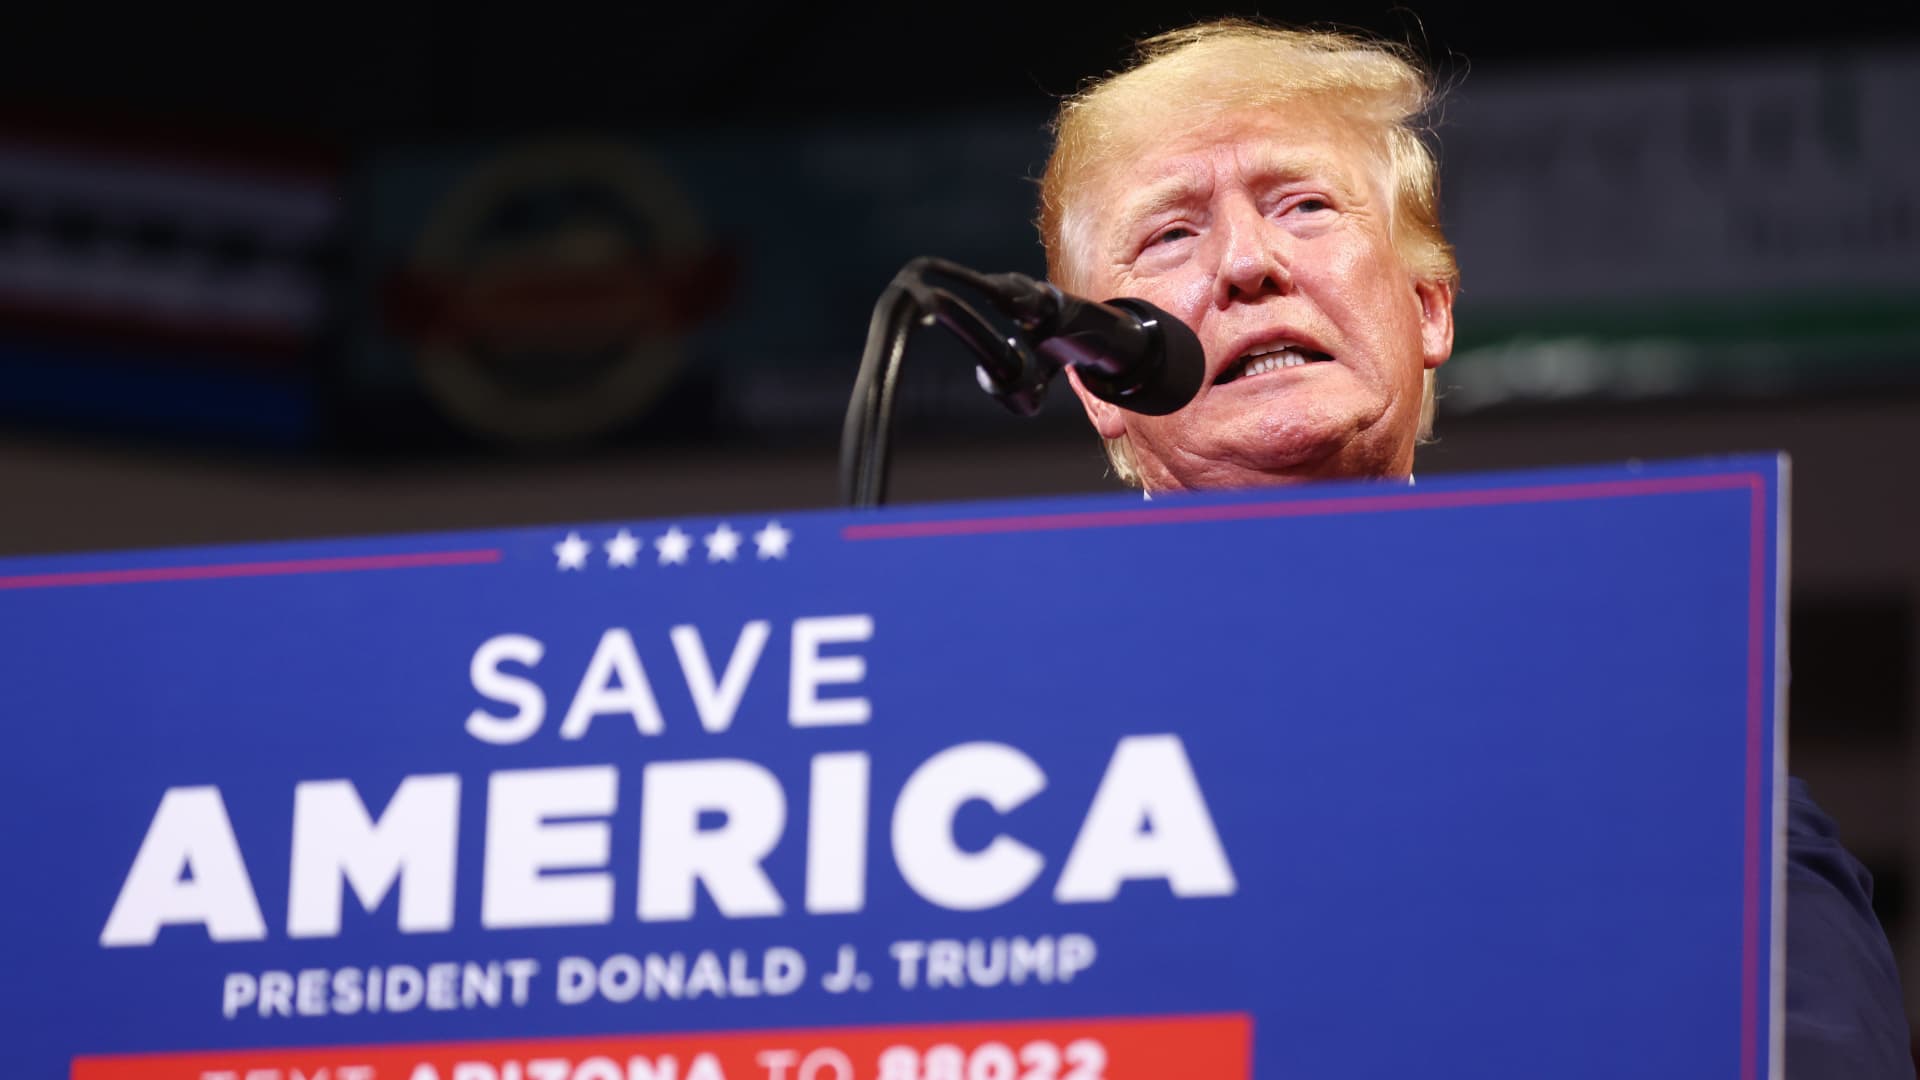 Former President Donald Trump speaks at a ‘Save America’ rally in support of Arizona GOP candidates on July 22, 2022 in Prescott Valley, Arizona.